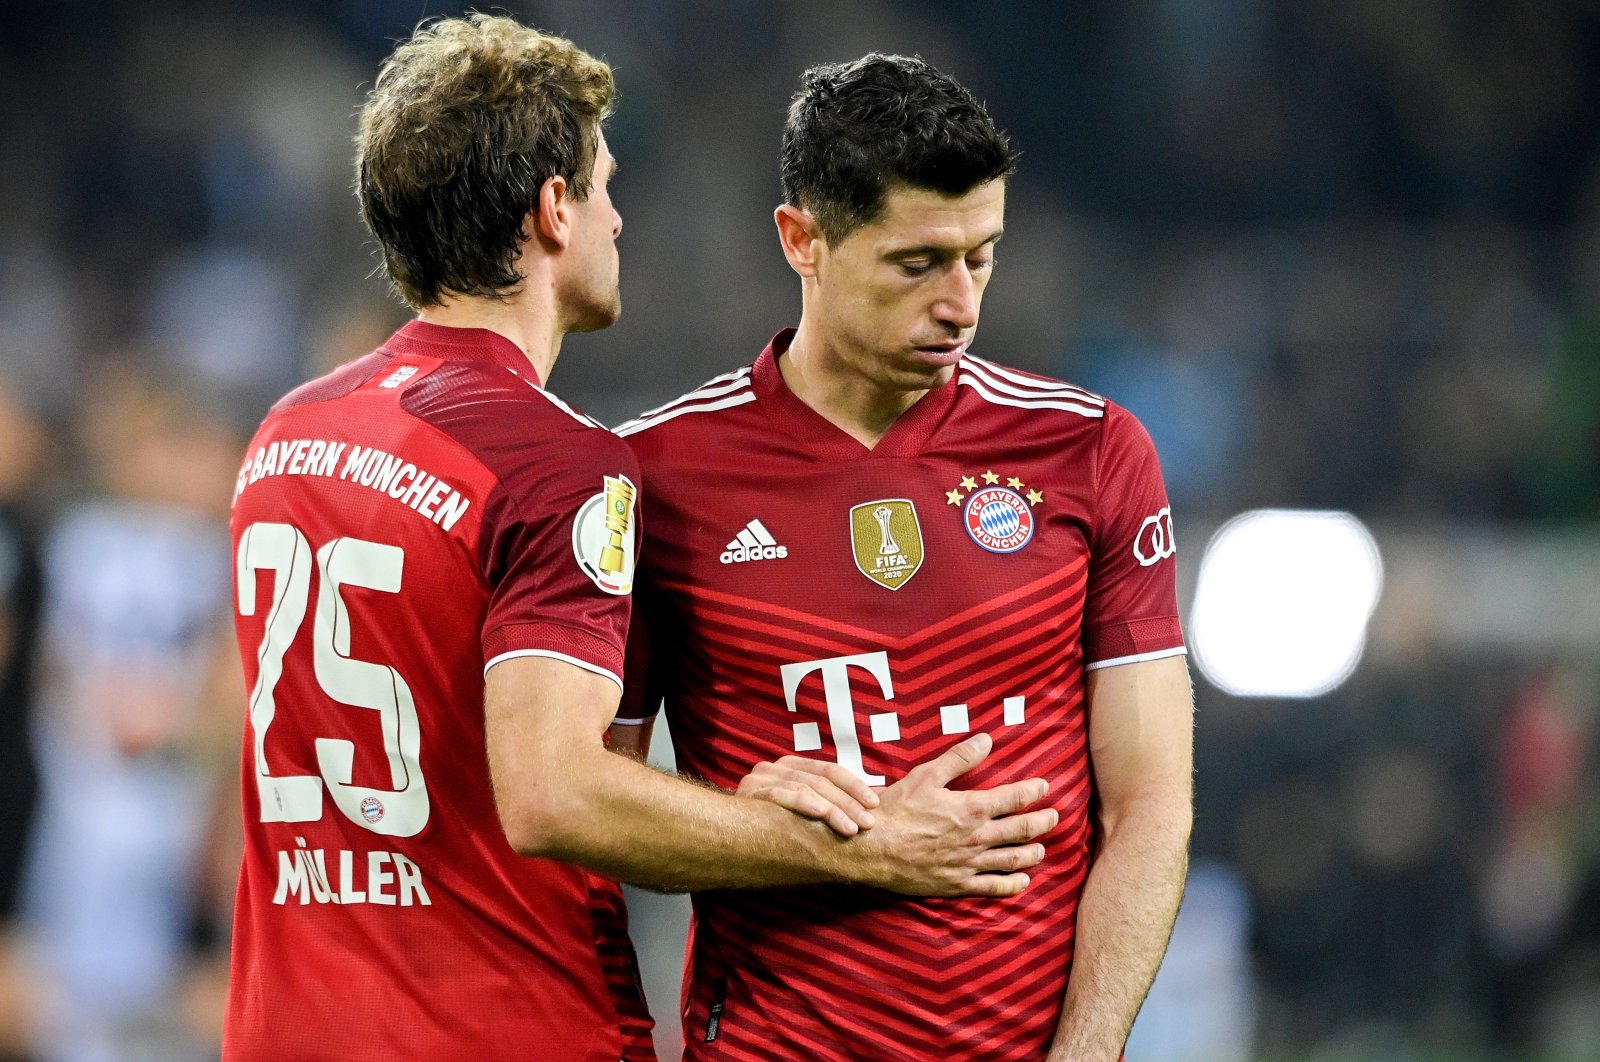 Bayern's Thomas Mueller (L) and Robert Lewandowski (R) react after losing the German DFB Cup second round match against Borussia Monchengladbach at Borussia-Park in Monchengladbach, Germany, Oct. 27, 2021. (EPA Photo)